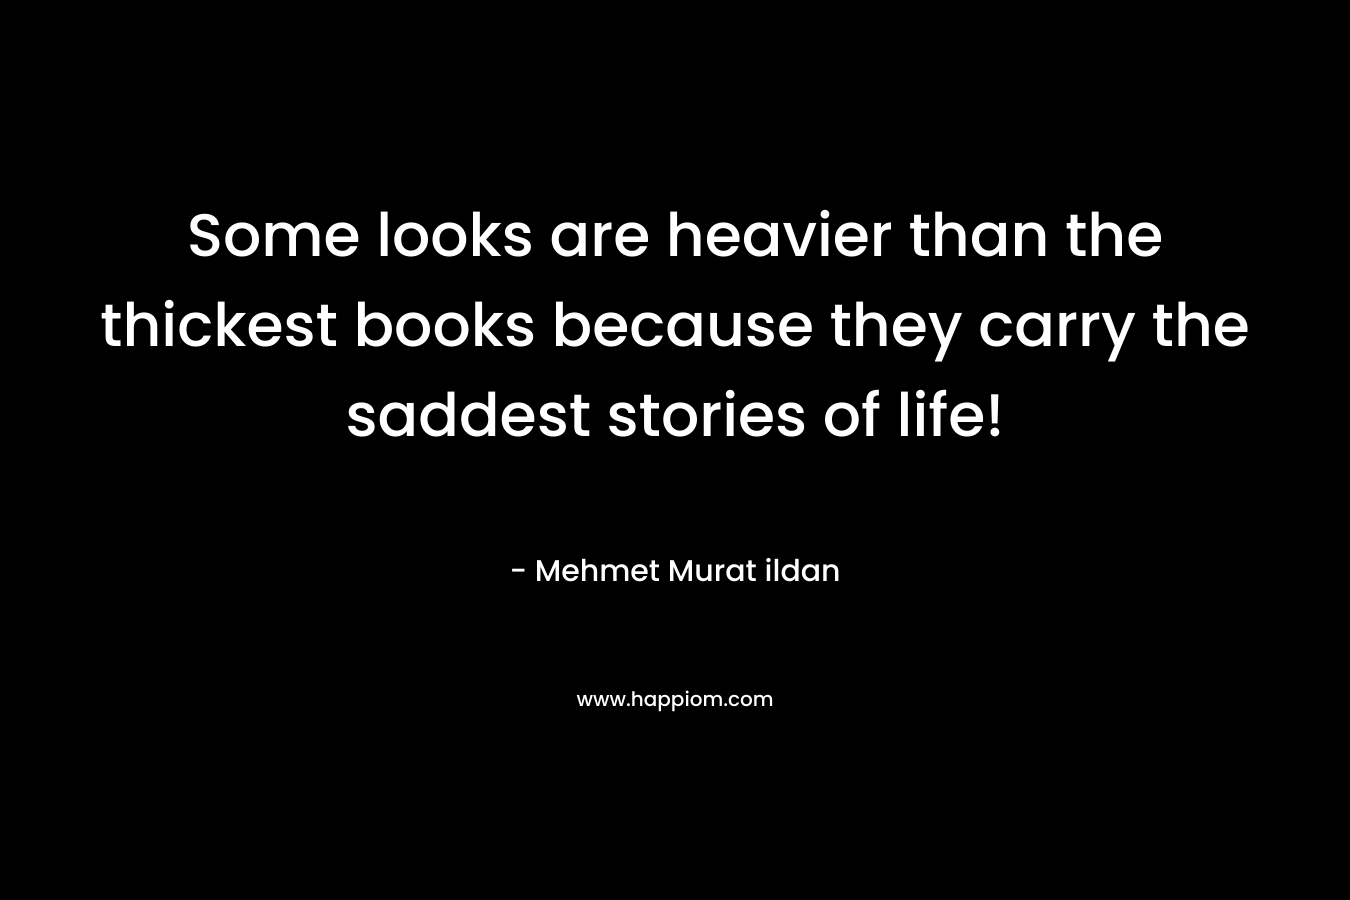 Some looks are heavier than the thickest books because they carry the saddest stories of life!